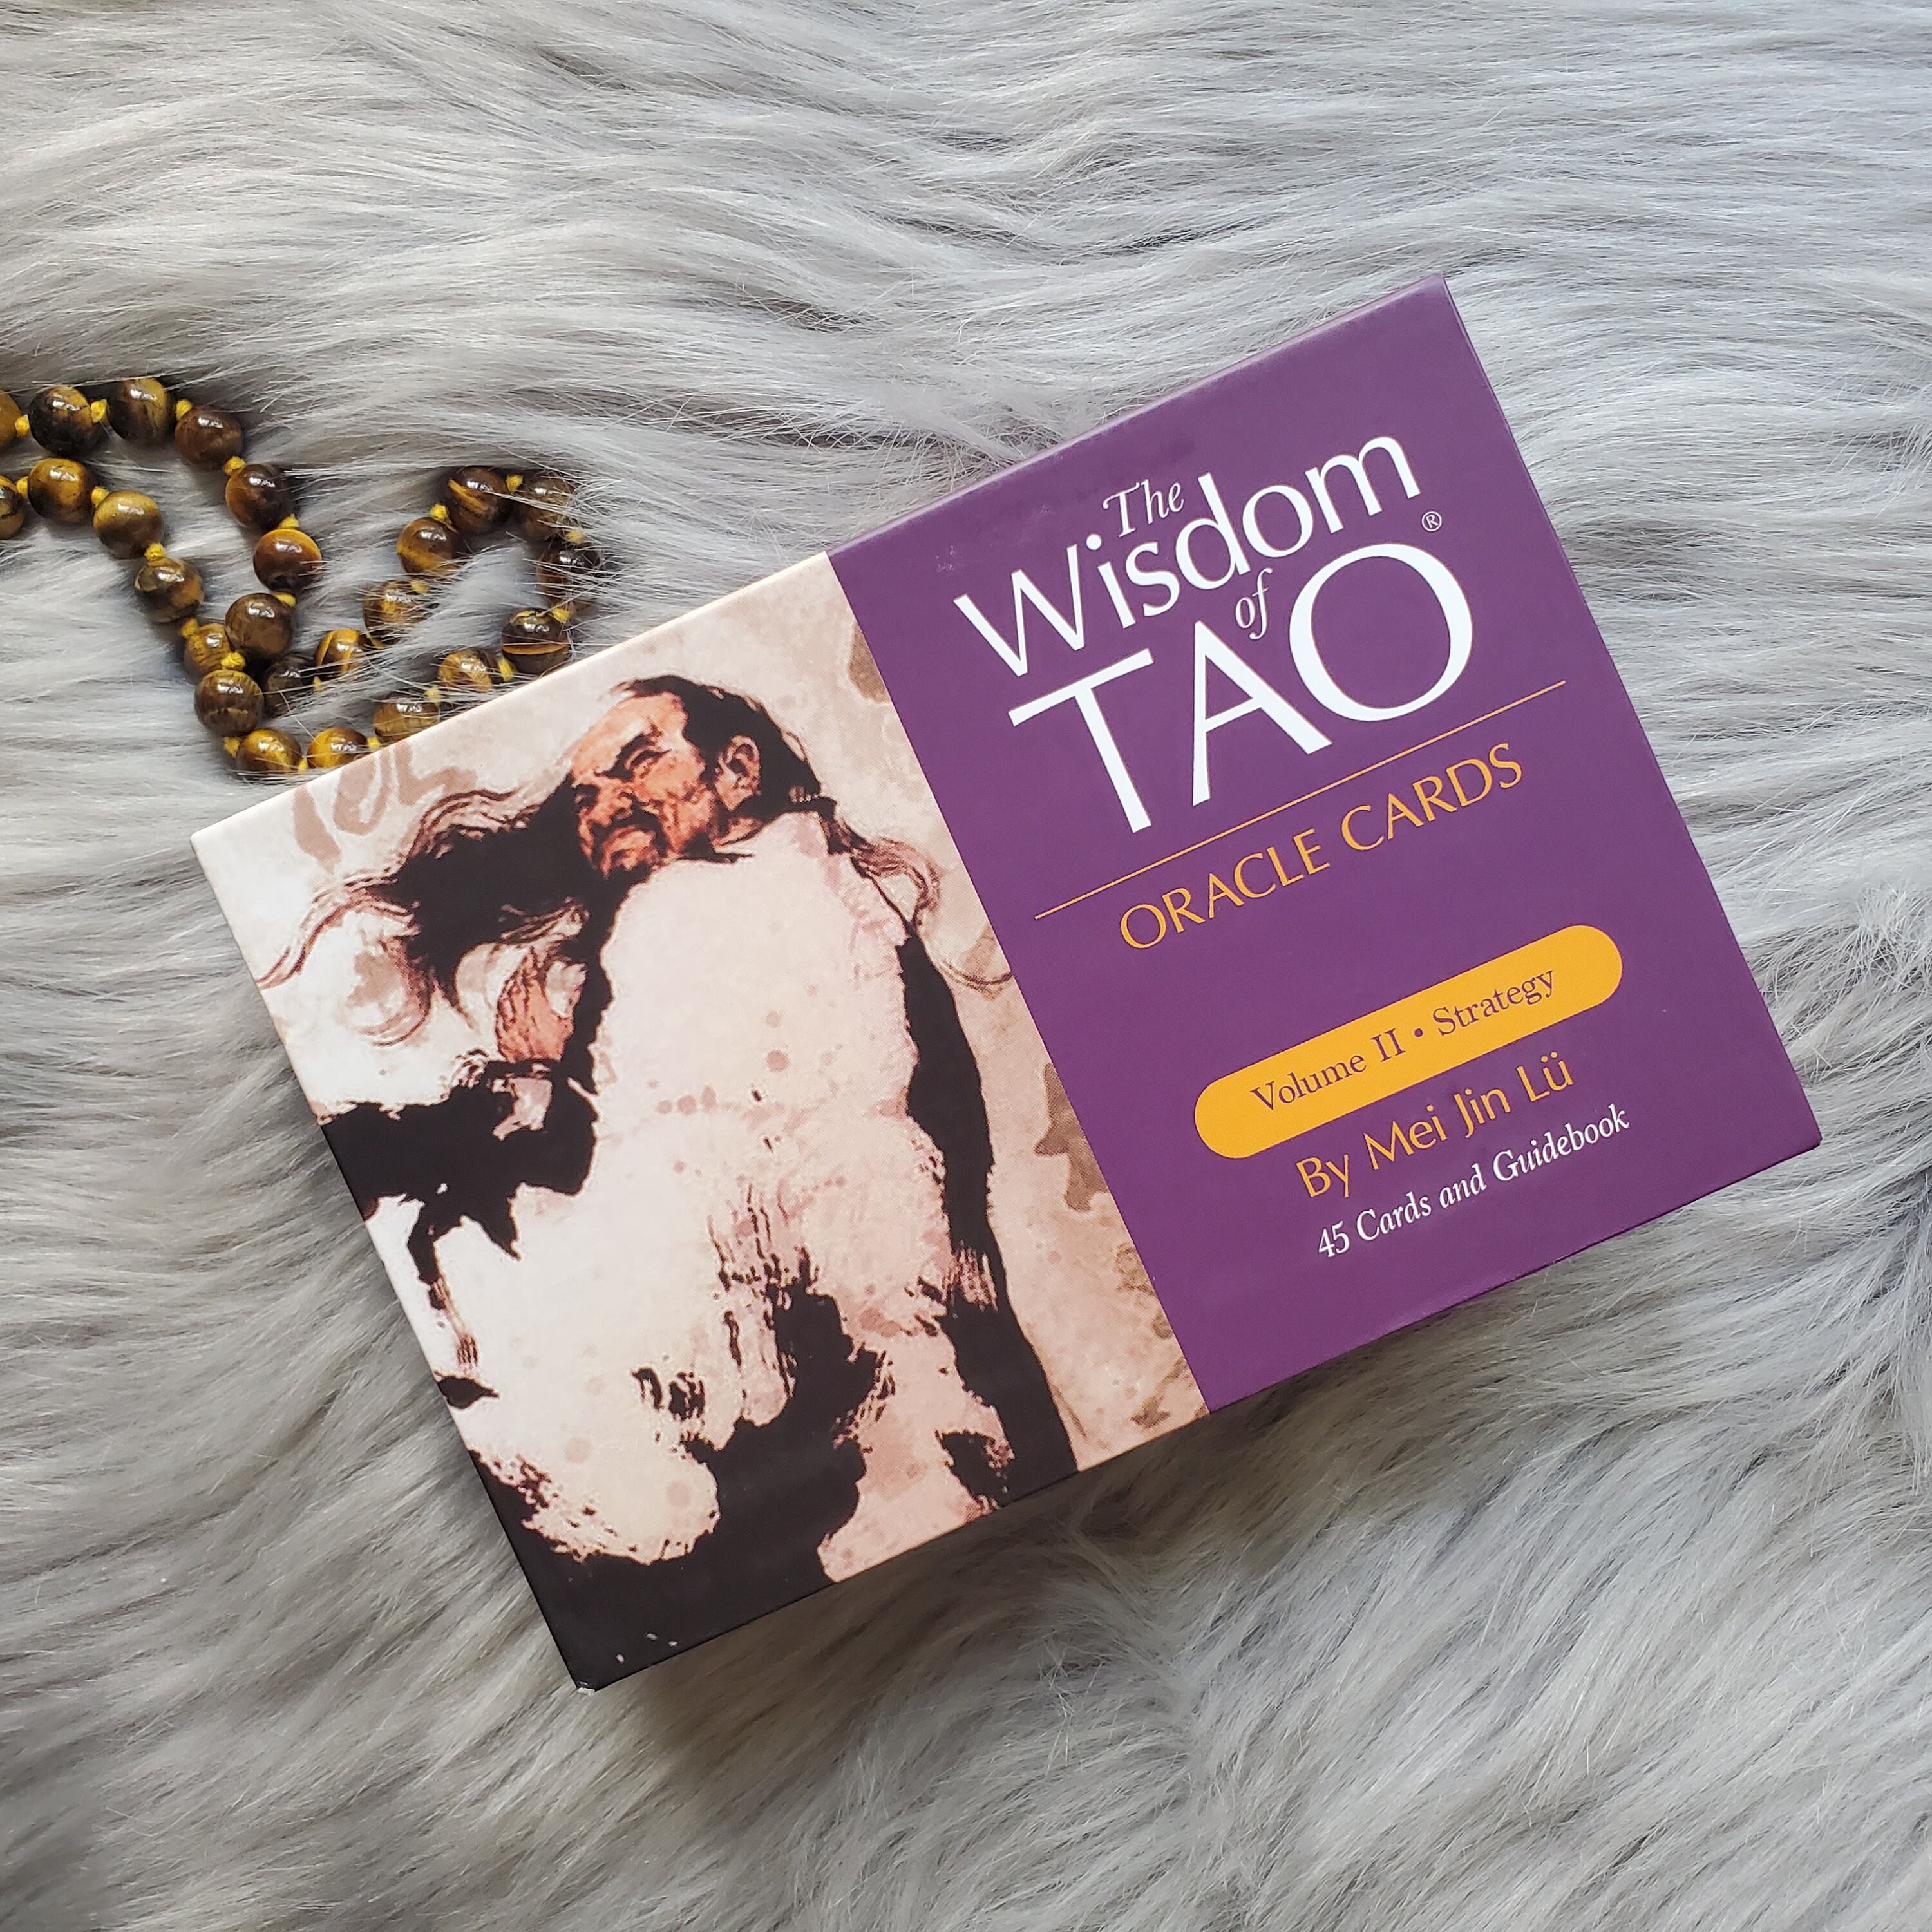 The Wisdom of Tao Oracle Cards Volume II - Strategy